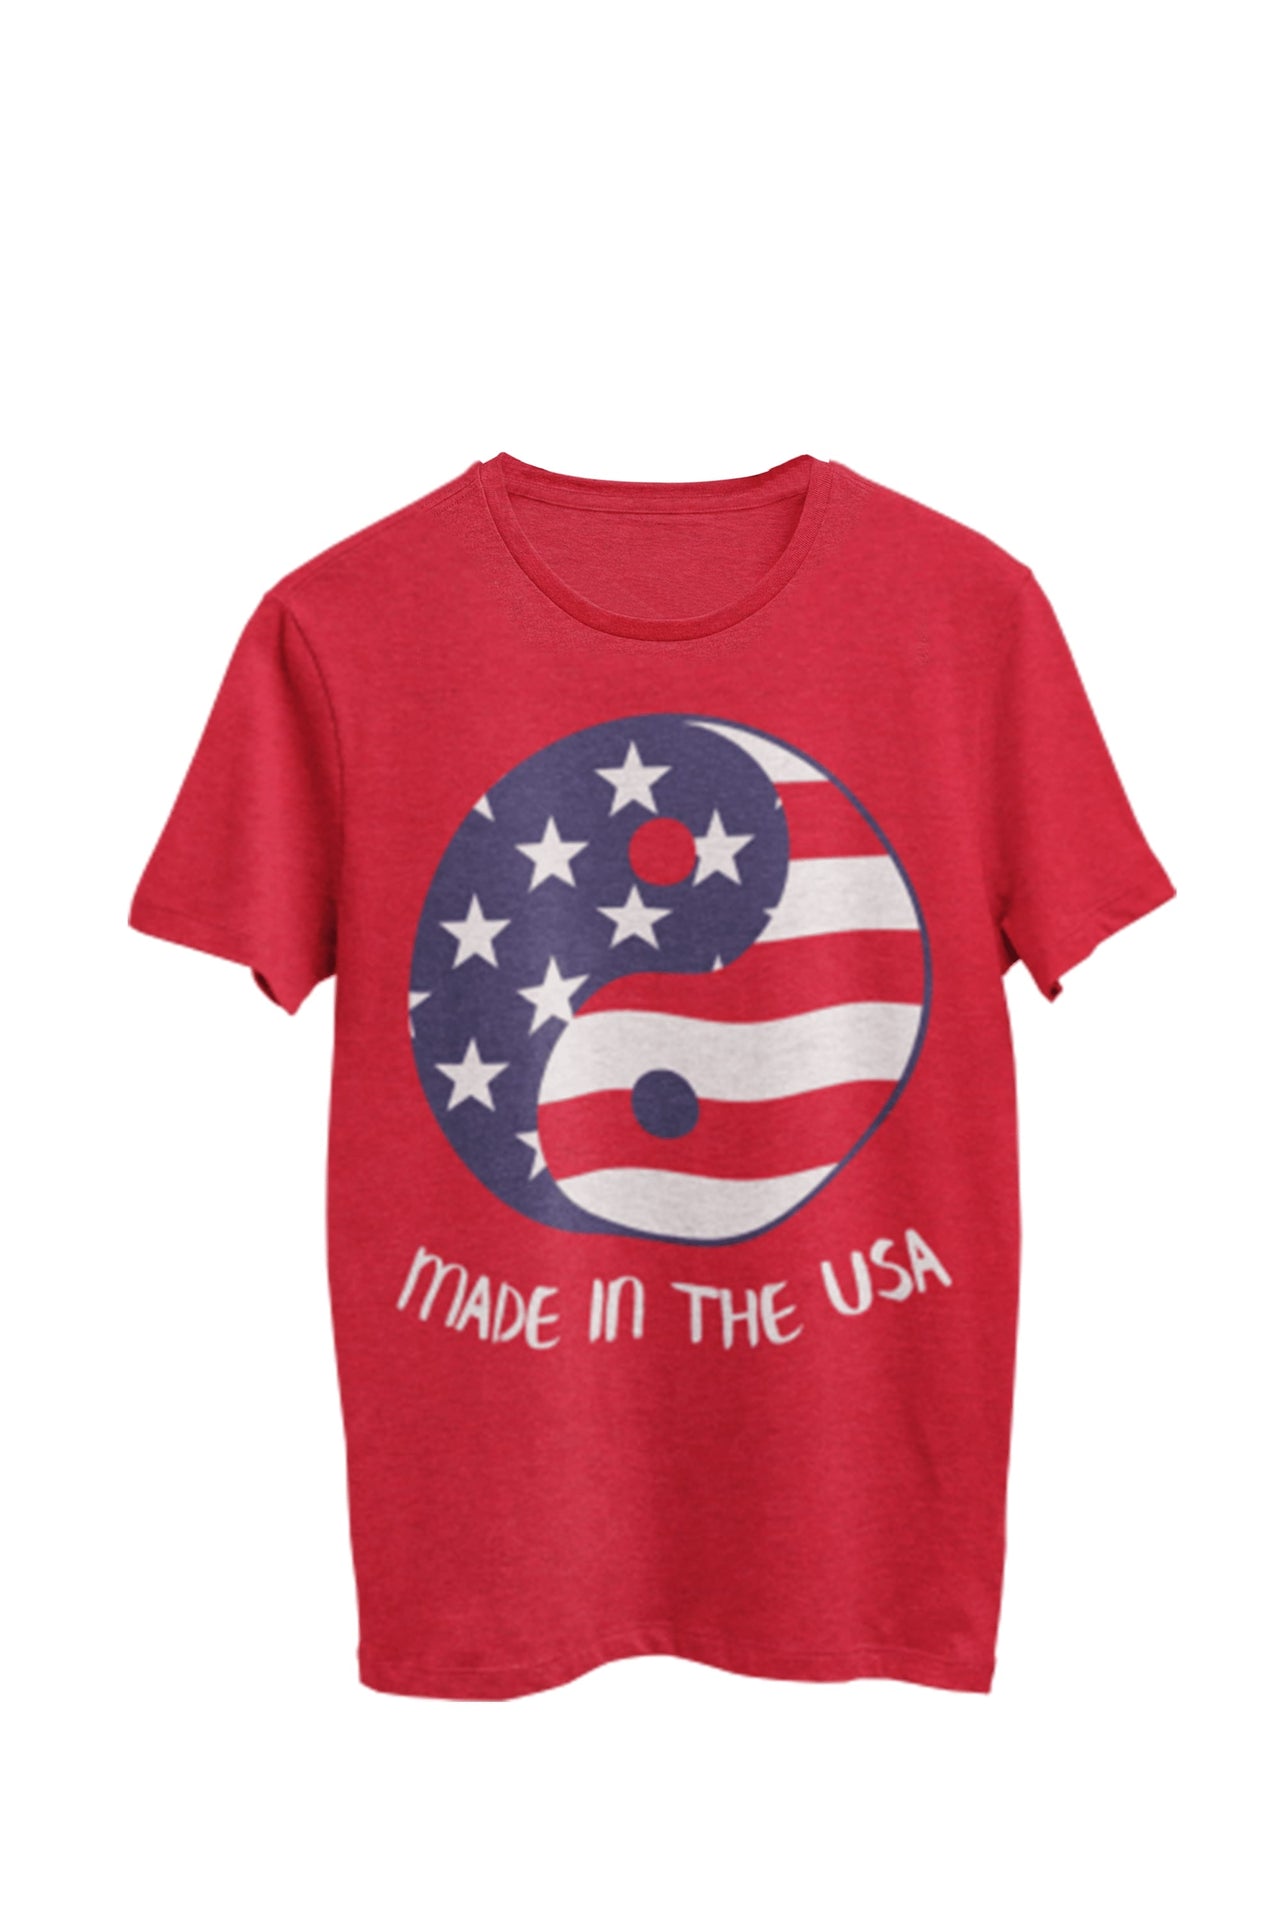 Red heather unisex t-shirt featuring a red, white, and blue Yin Yang flag symbol and the words 'Made in the USA'. Designed by WooHoo Apparel